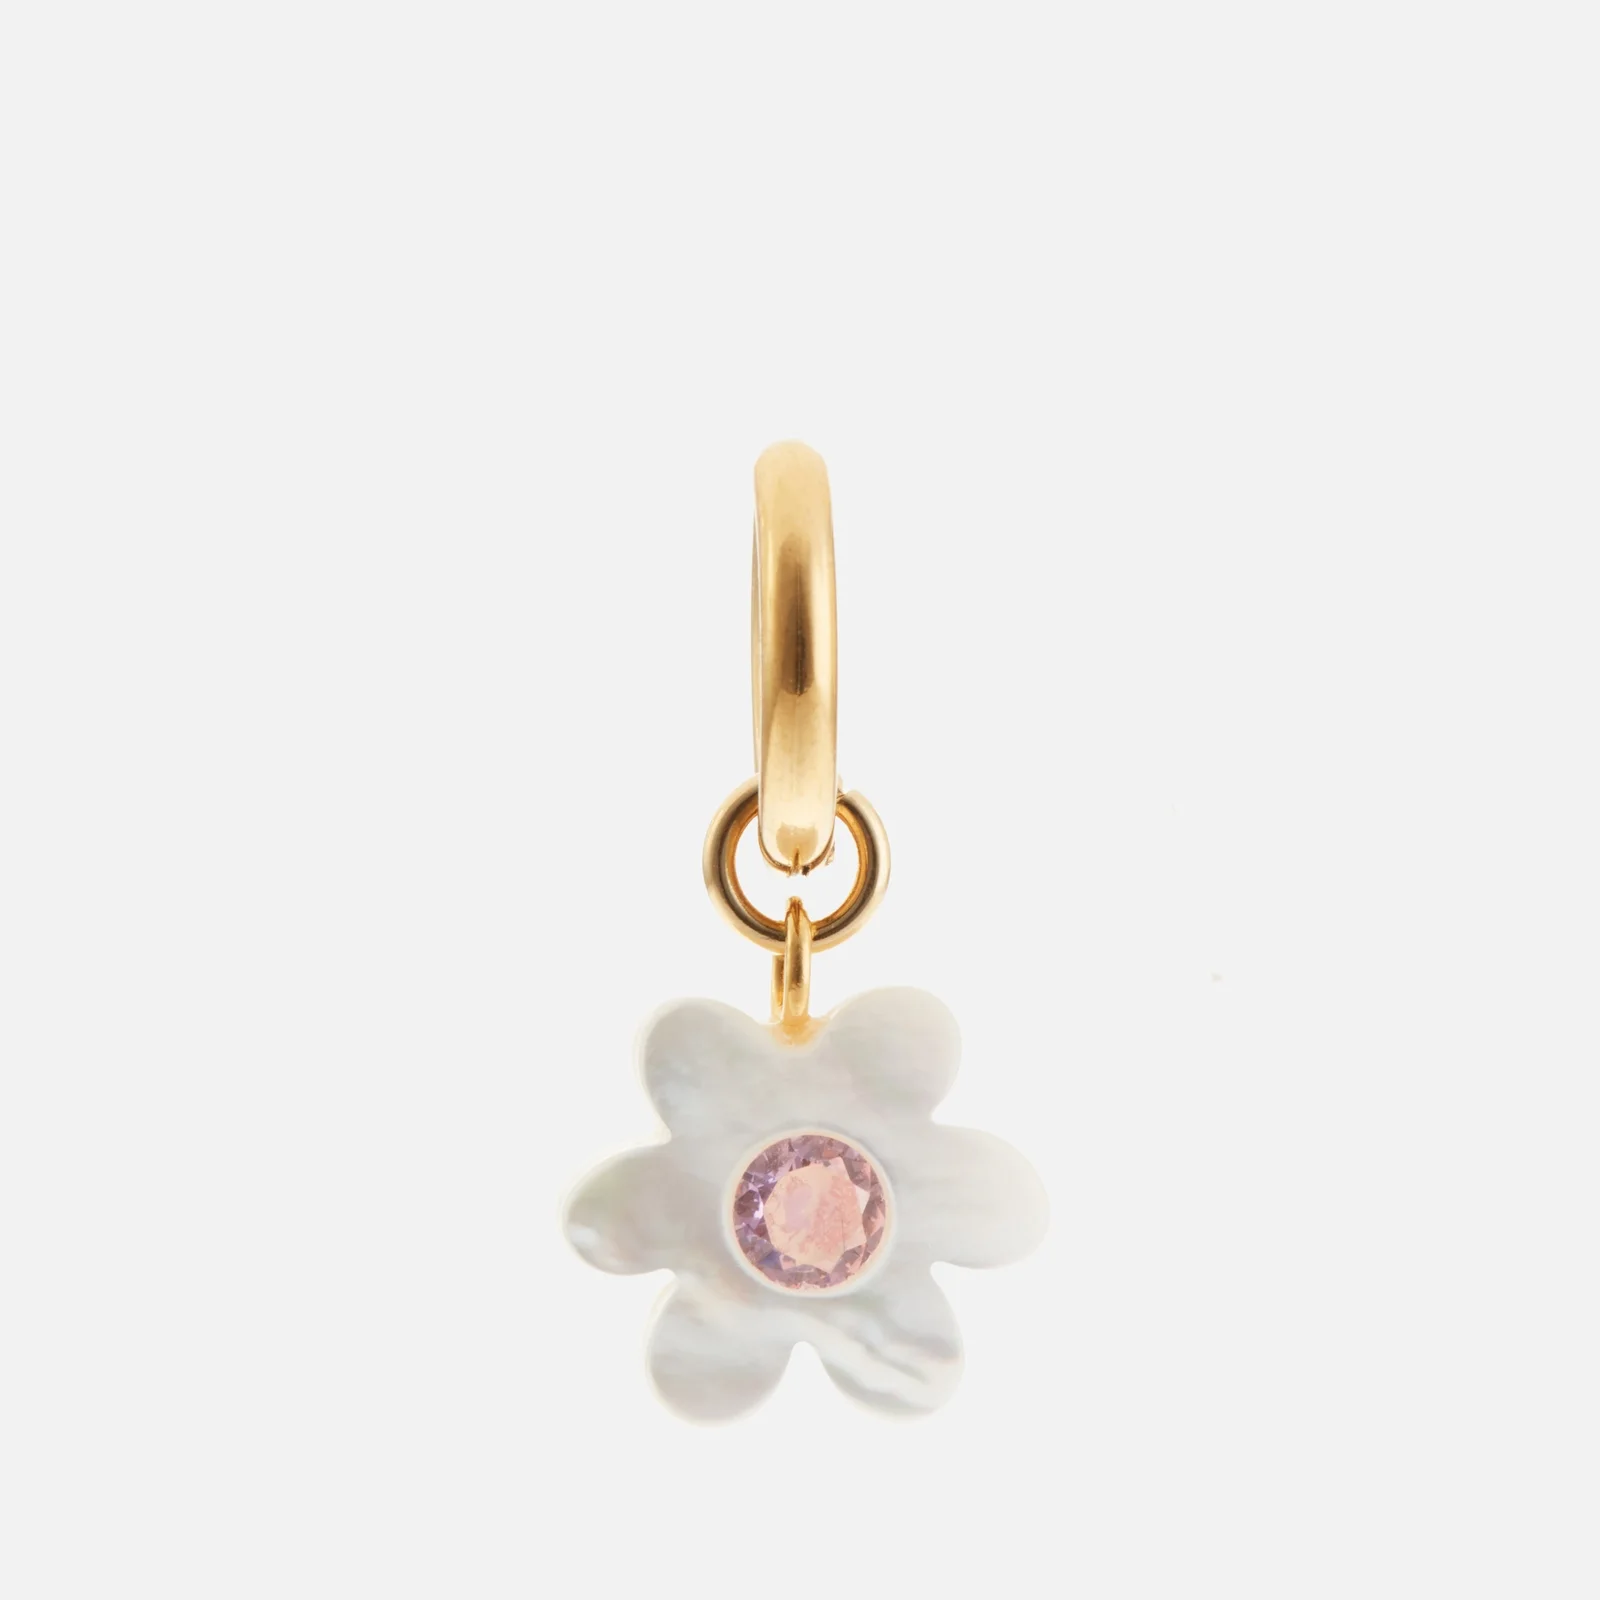 Notte Mini Superbloom Glow Gold-Plated Stud Earring Image 1